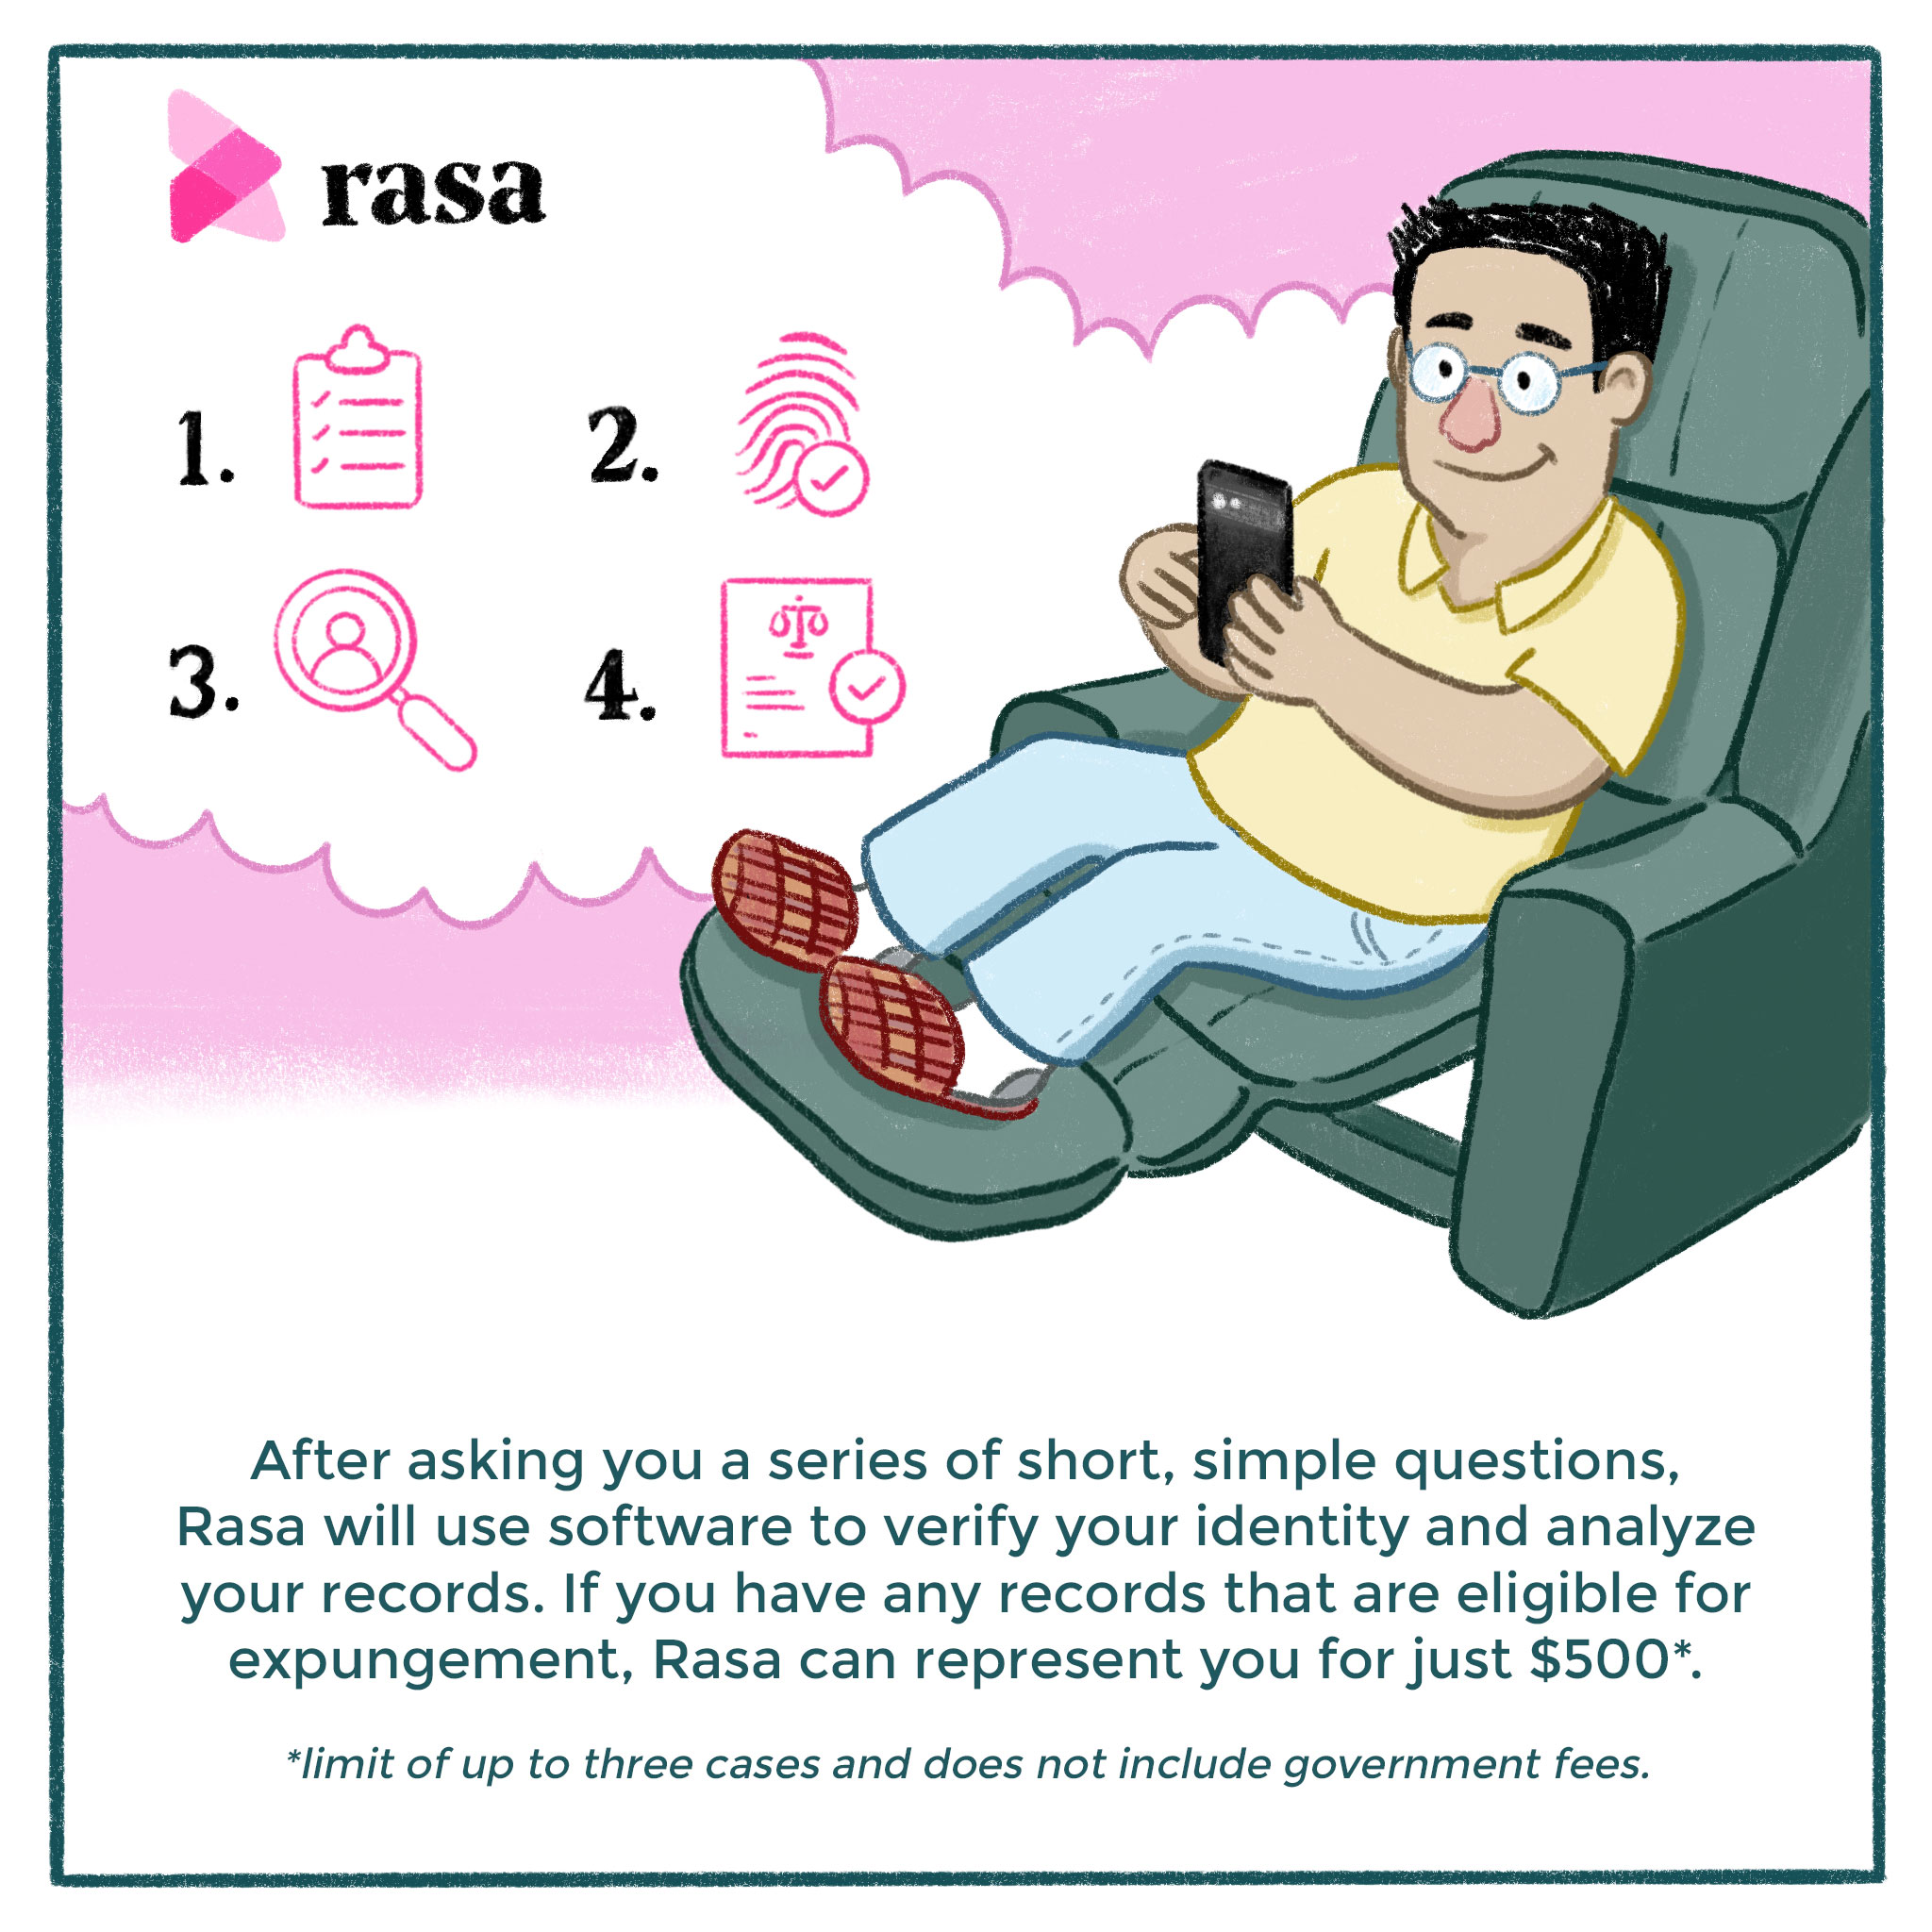 8. Image: Illustration of a man in a recliner following steps on his phone. Text: After asking you a series of short, simple questions, Rasa will use software to verify your identity and analyze your records. If you have any records that are eligible for expungement, Rasa can represent you for just $500* *Limit of up to three cases and does not include government fees.